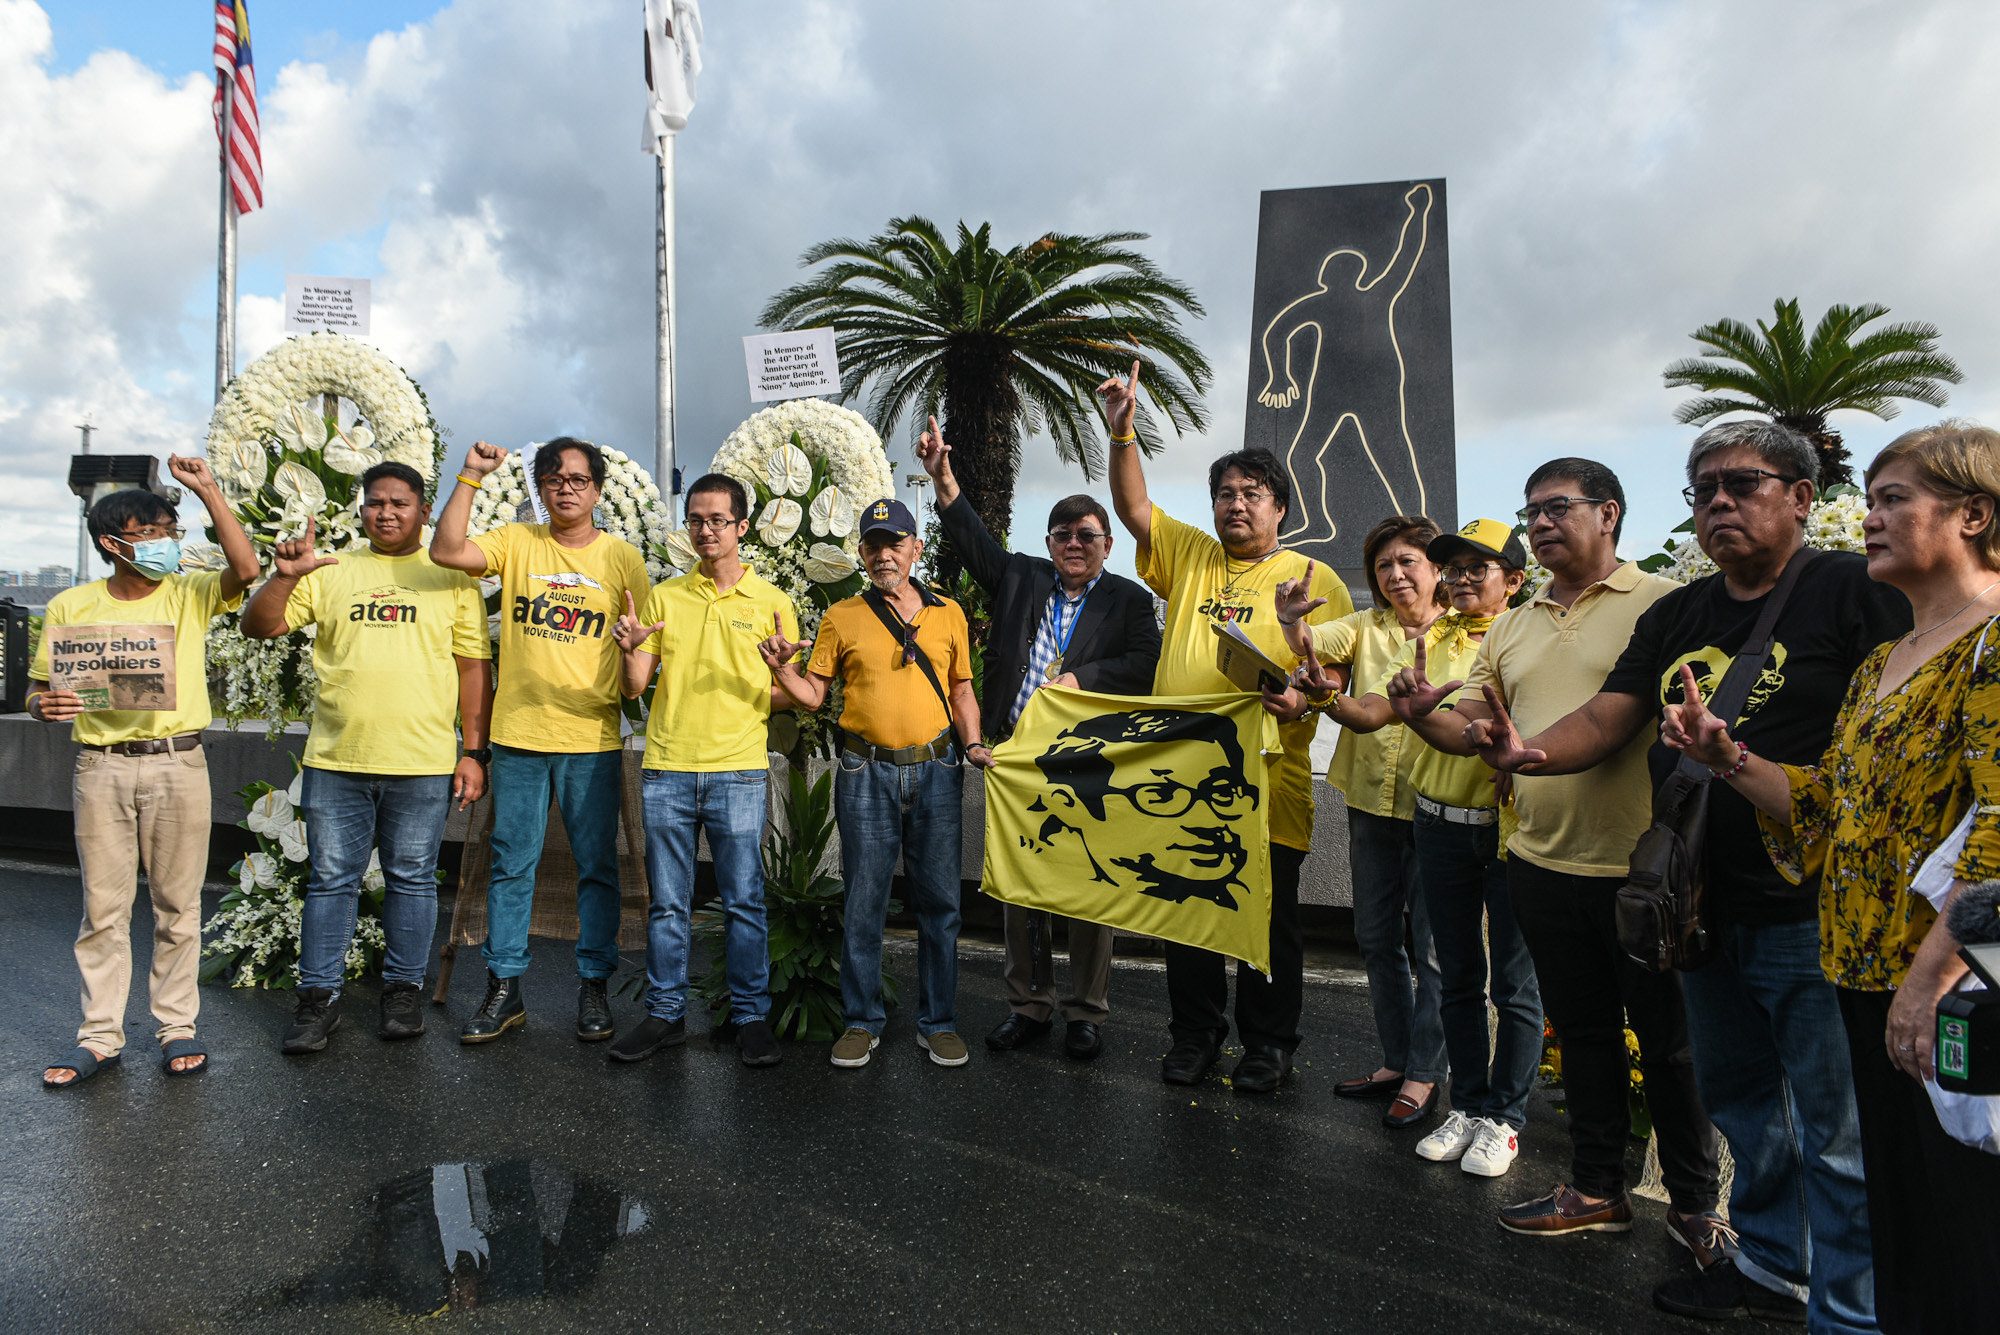 IN PHOTOS: Ninoy Aquino Day marked in NAIA, the airport where he was killed